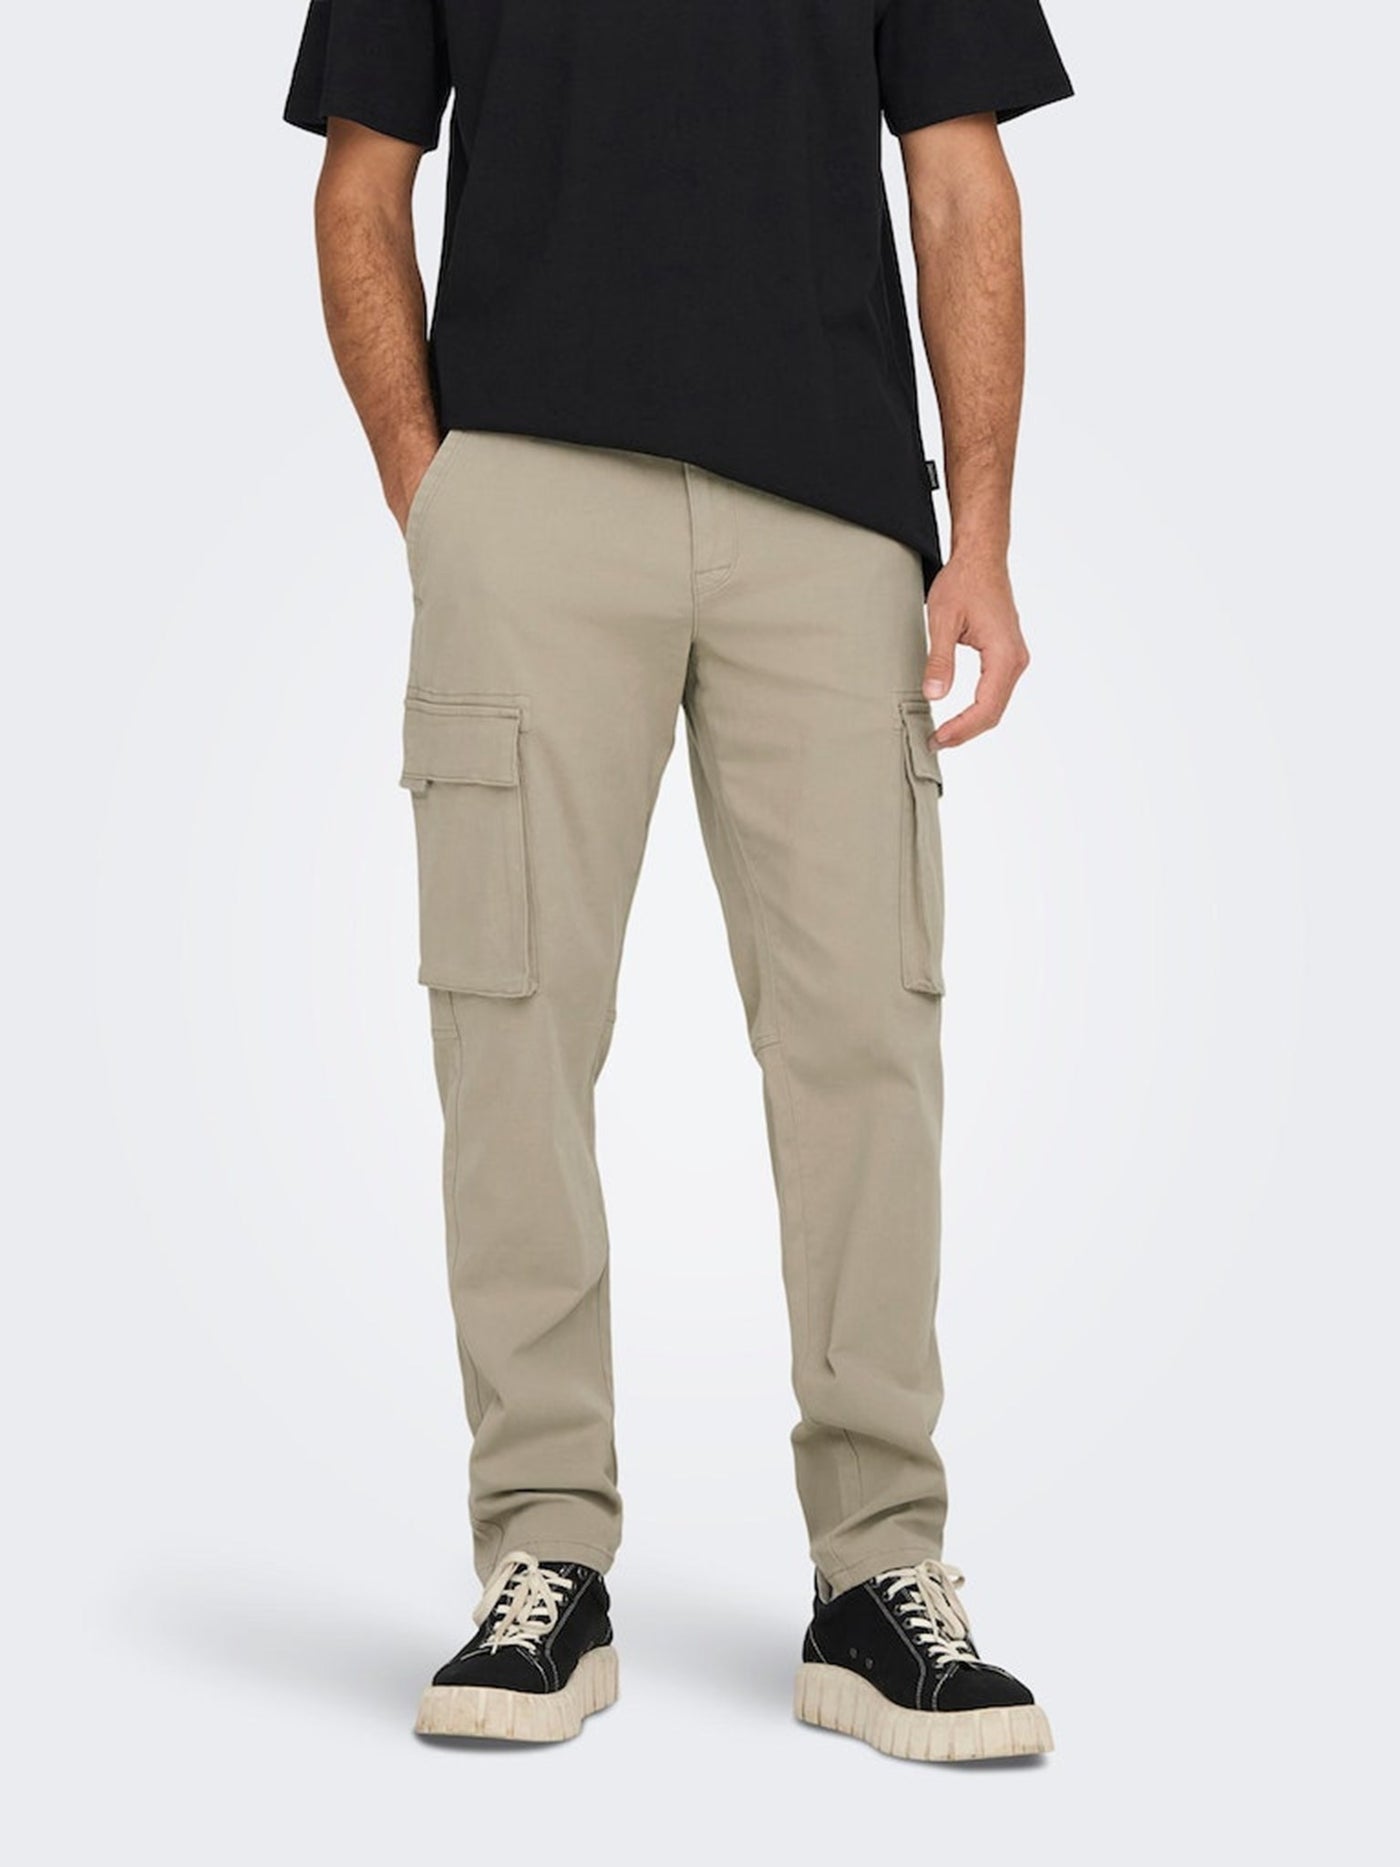 Next Cargo Pants - Chinchilla - Only & Sons - Sand/Beige